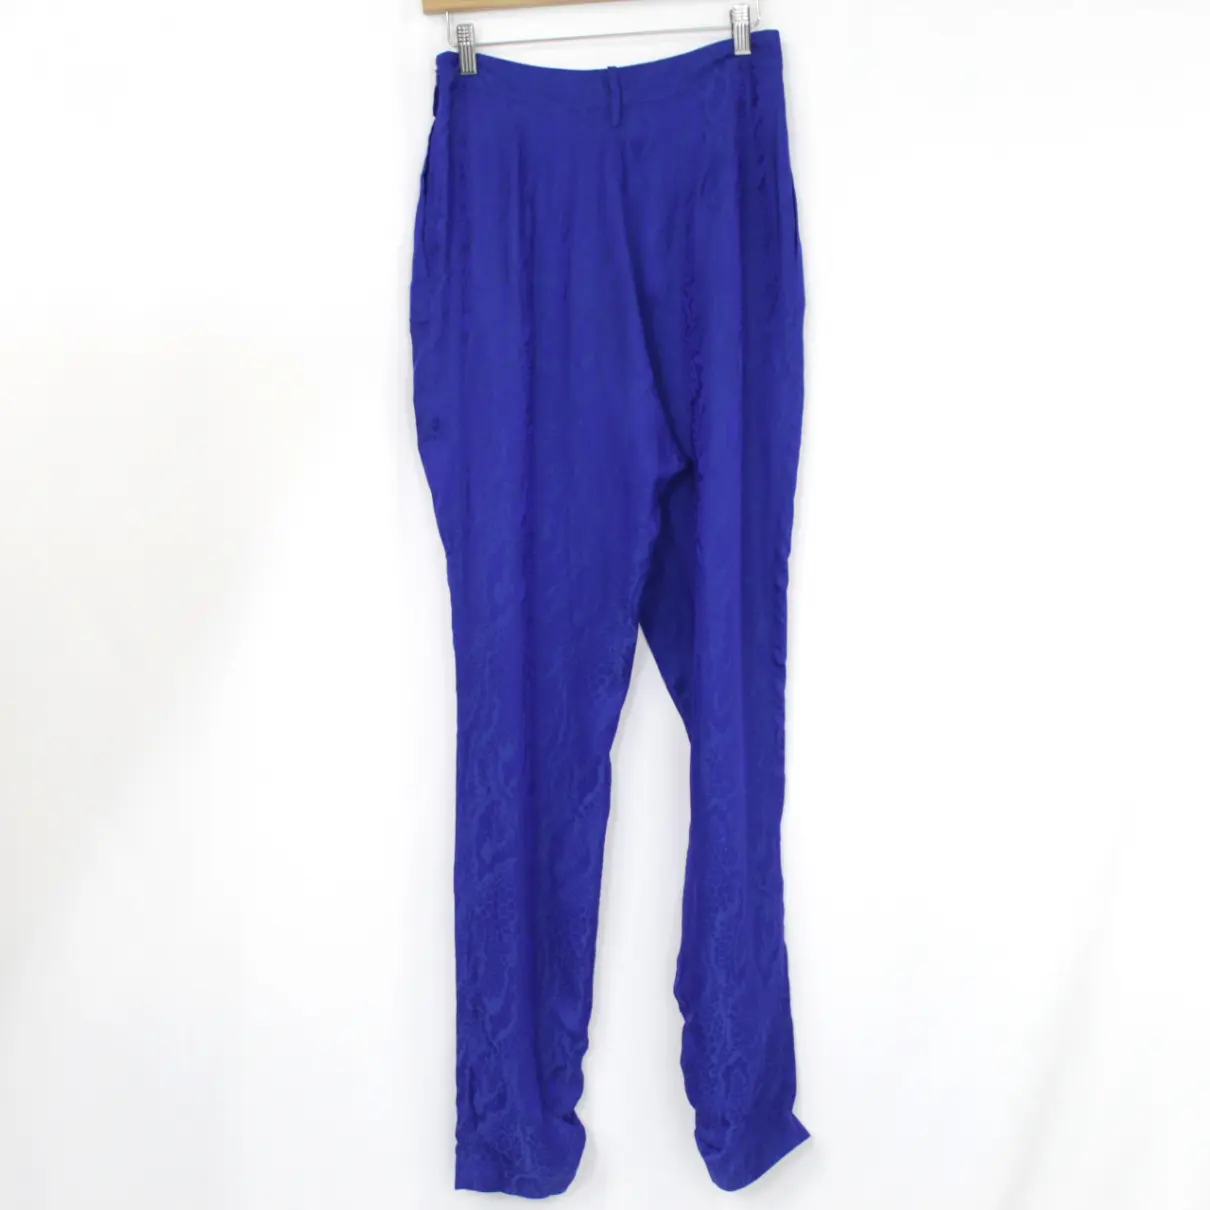 Buy Dundas Trousers online